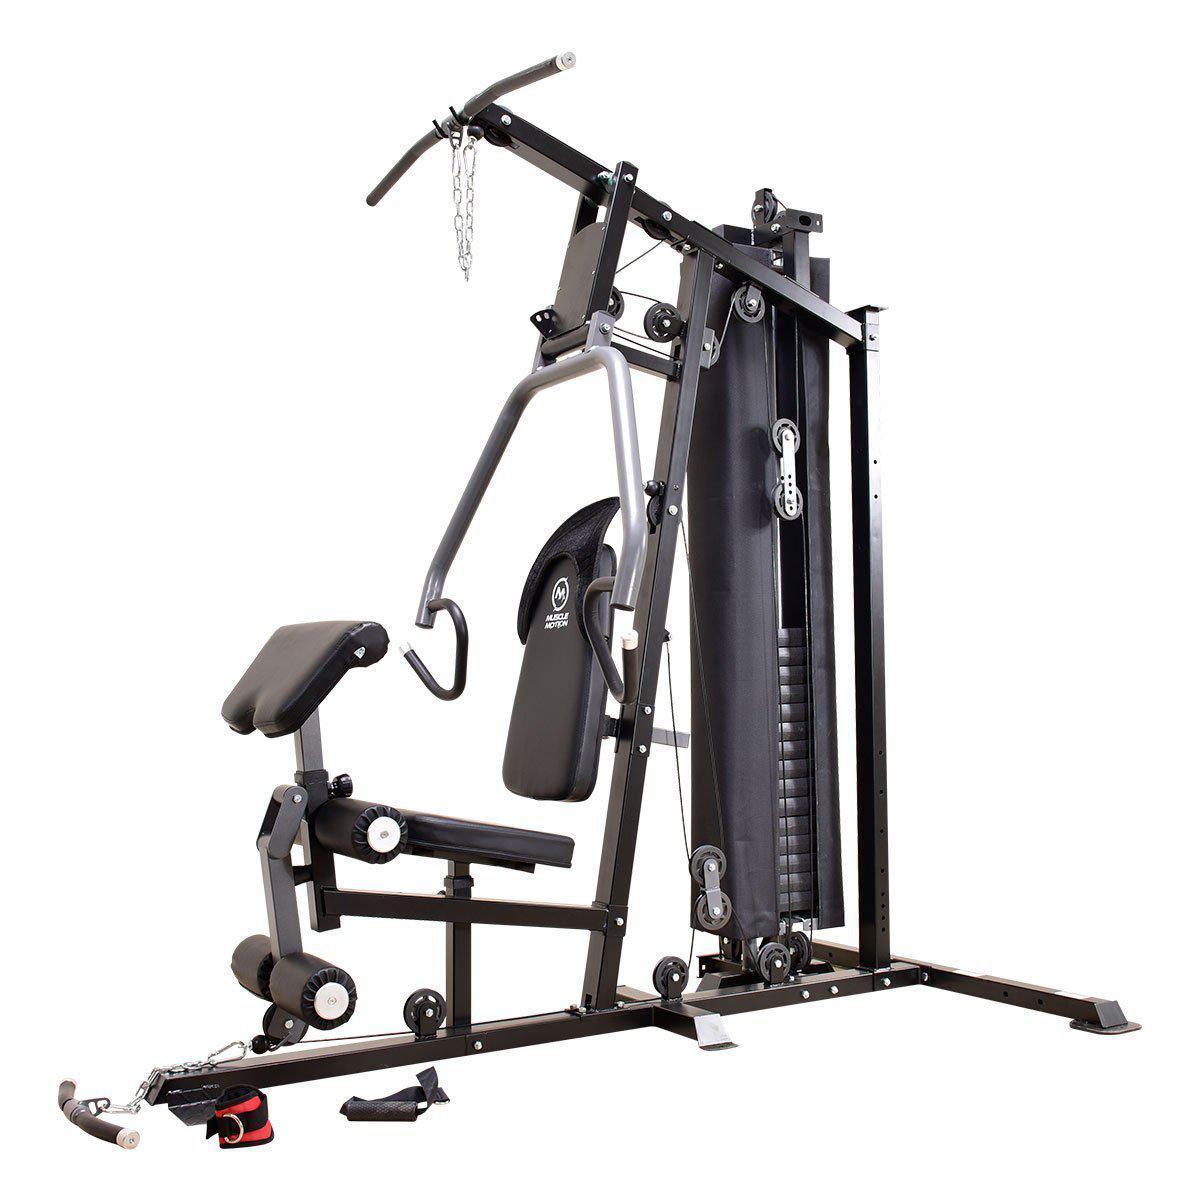 MSG1000ACDE Muscle Motion Commercial Multi Station Home Gym-Multi Station Gym-Gym Direct